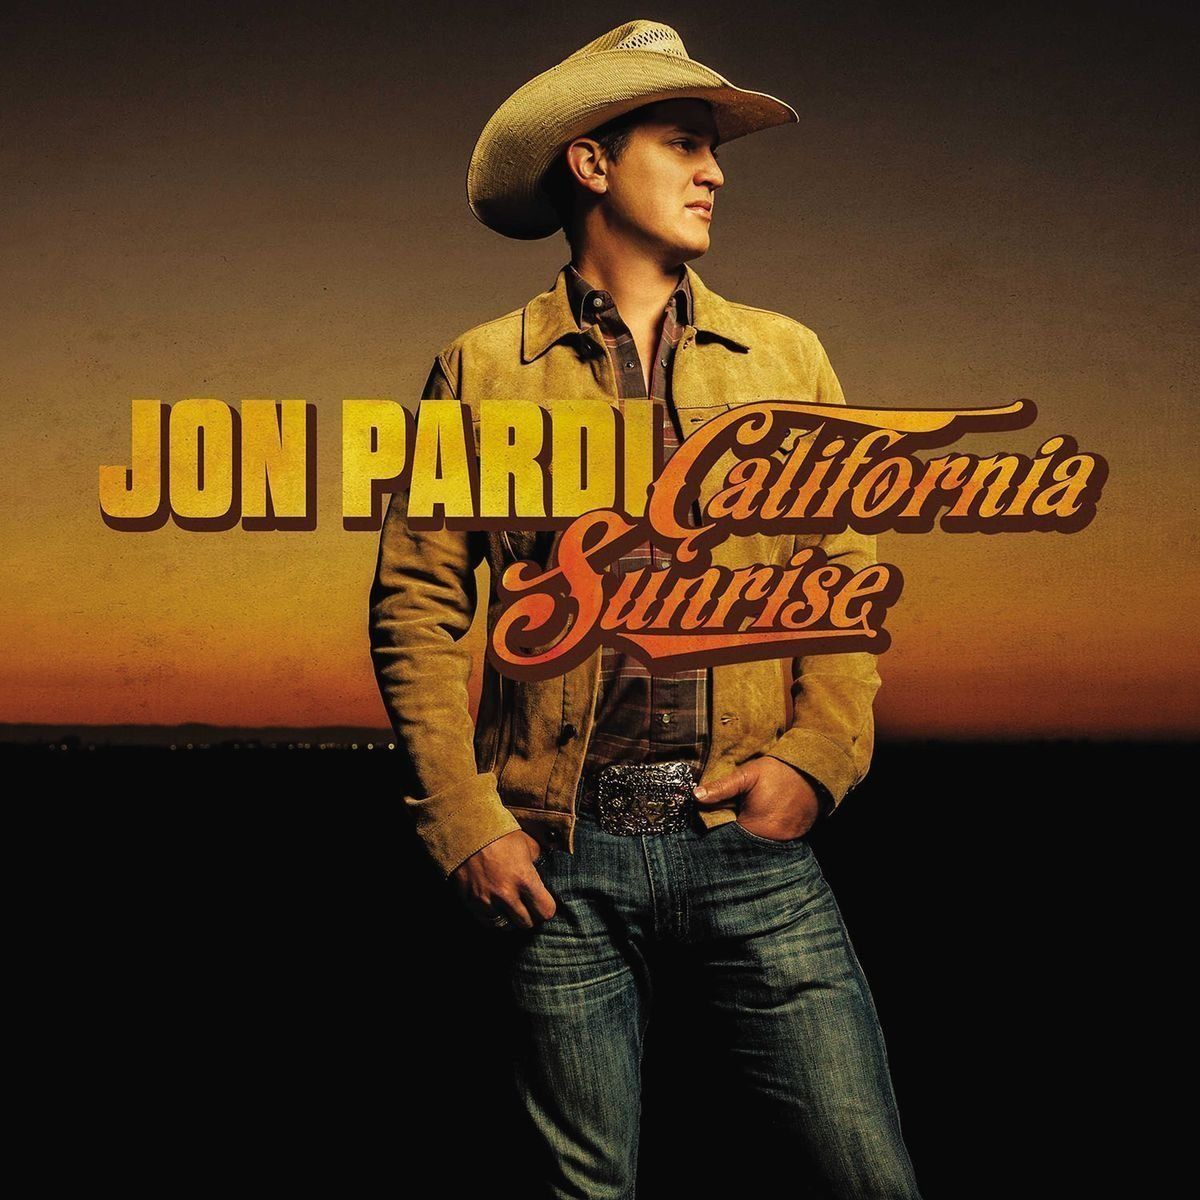 JON PARDI TOPS COUNTRY RADIO CHARTS WITH THIRD CONSECUTIVE #1 SINGLE “HEARTACHE ON THE DANCE FLOOR”